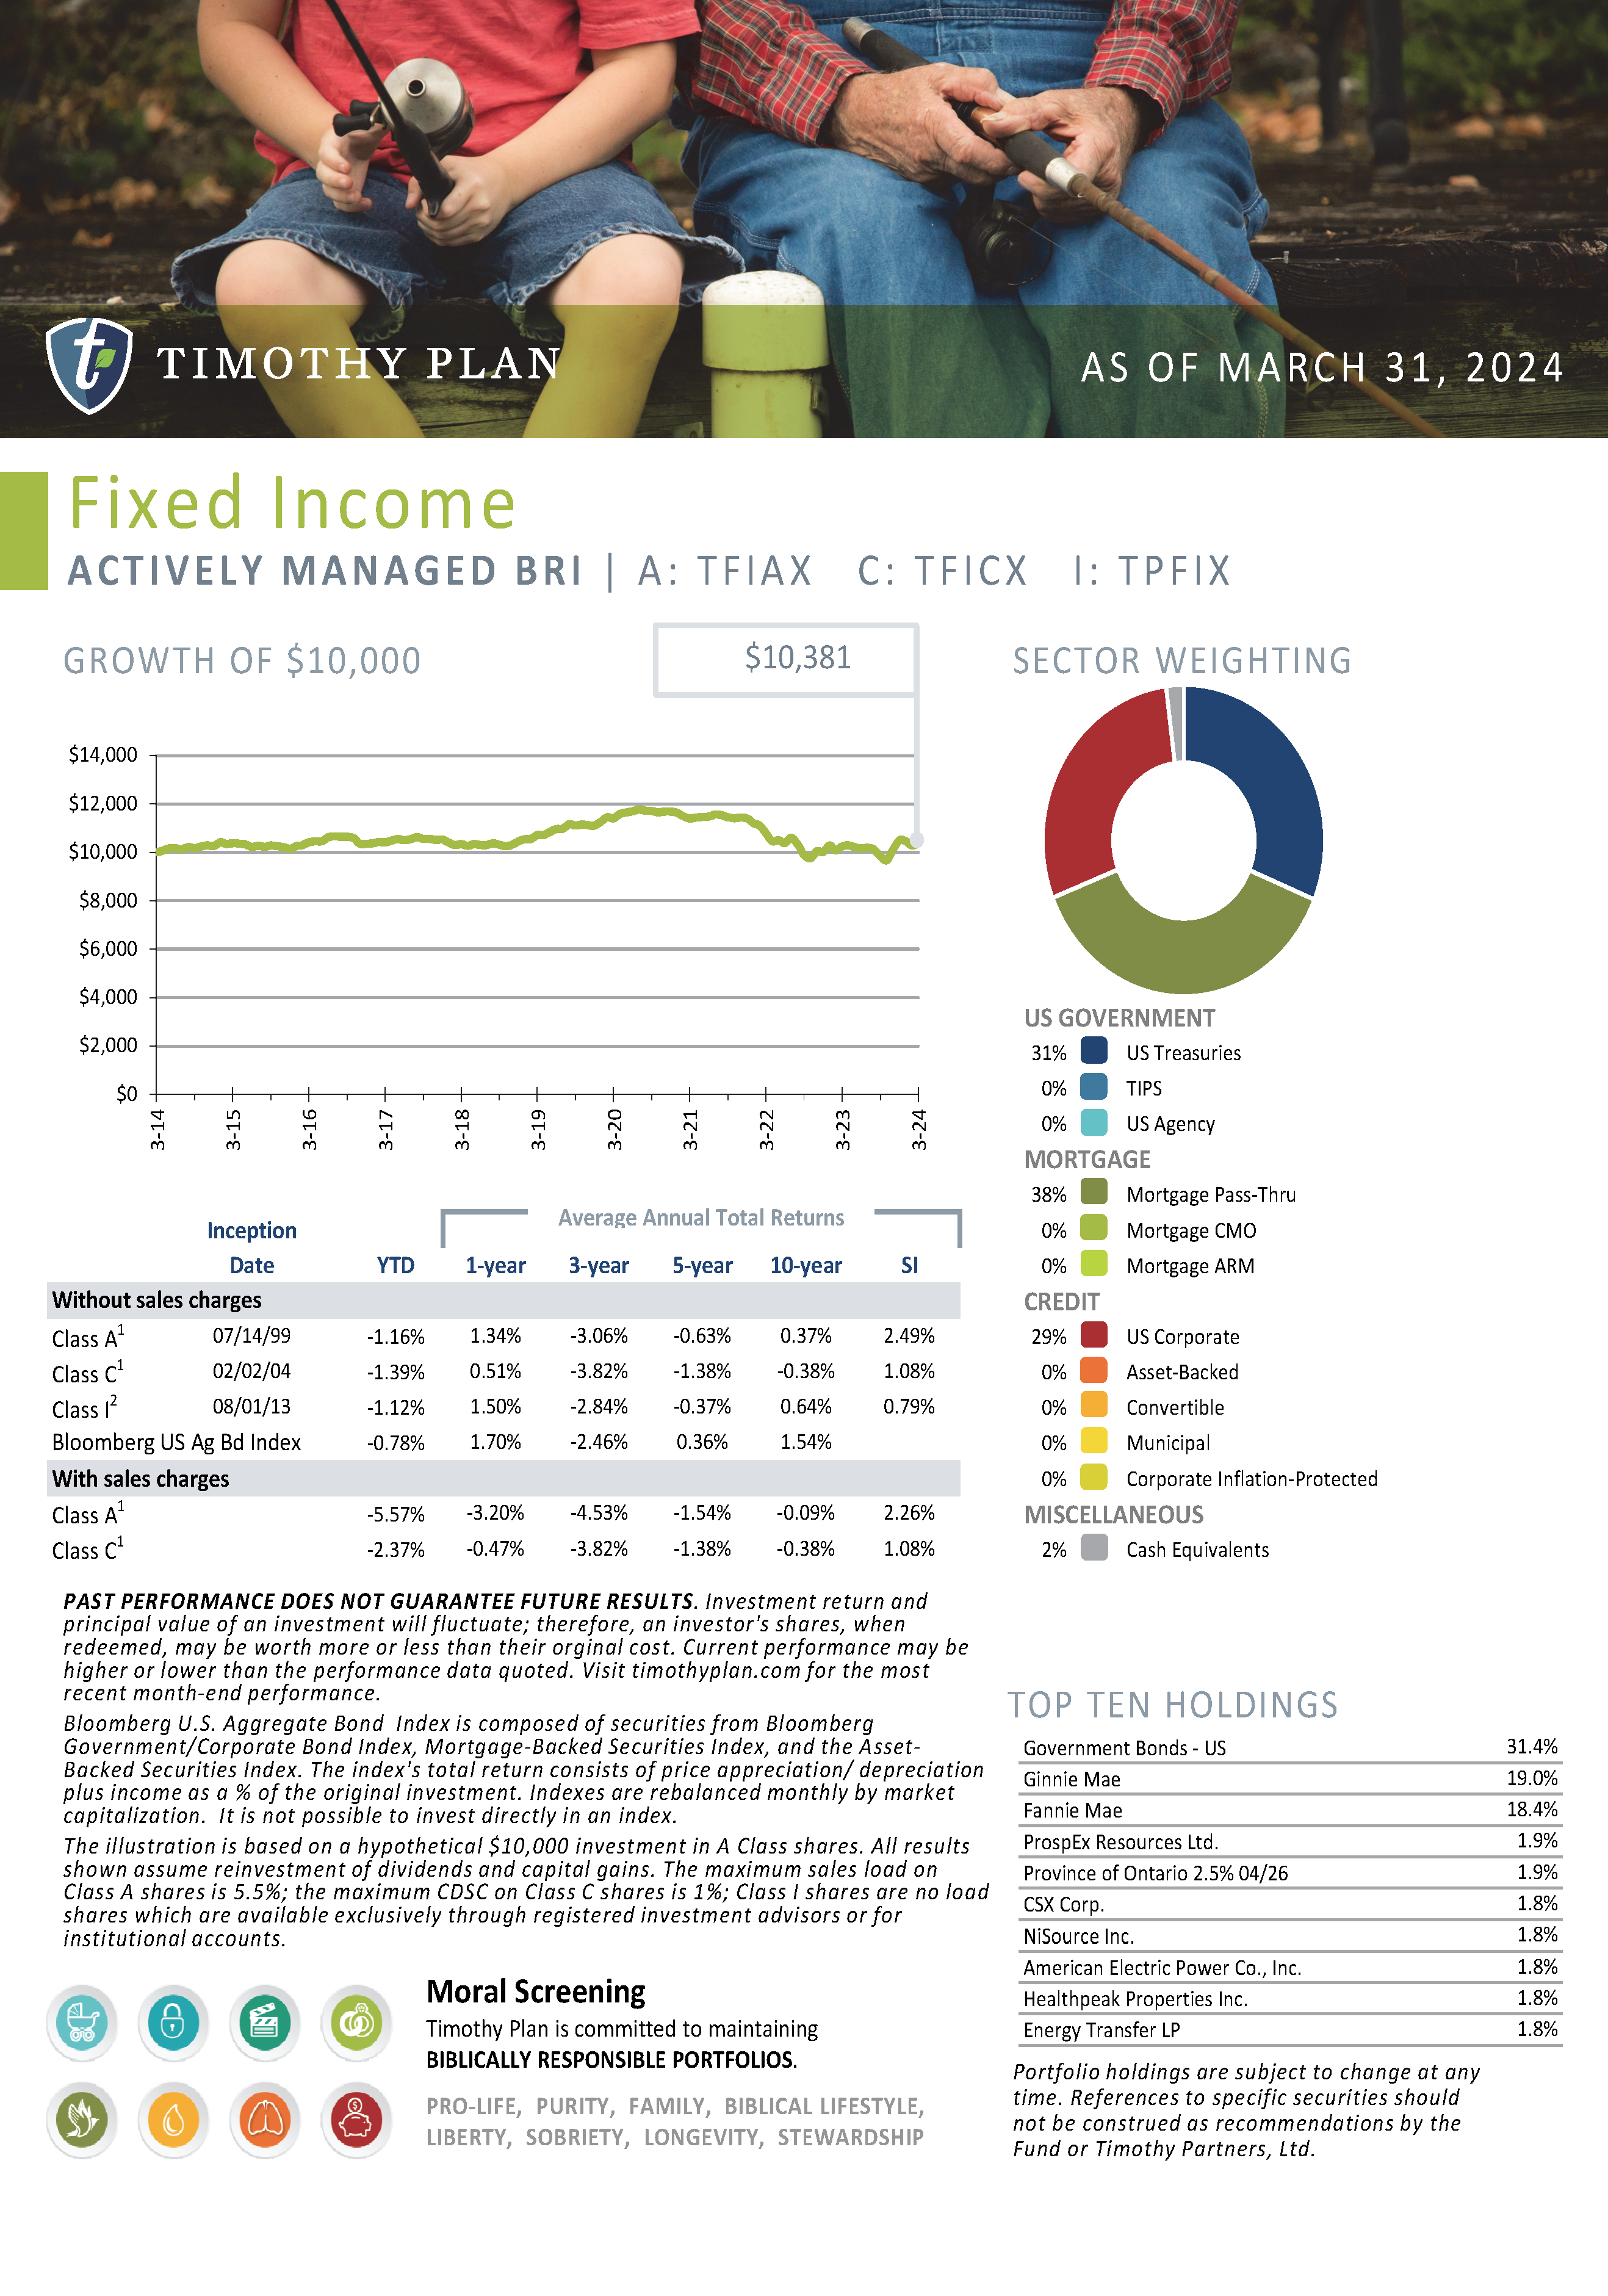 Fixed Income page 11